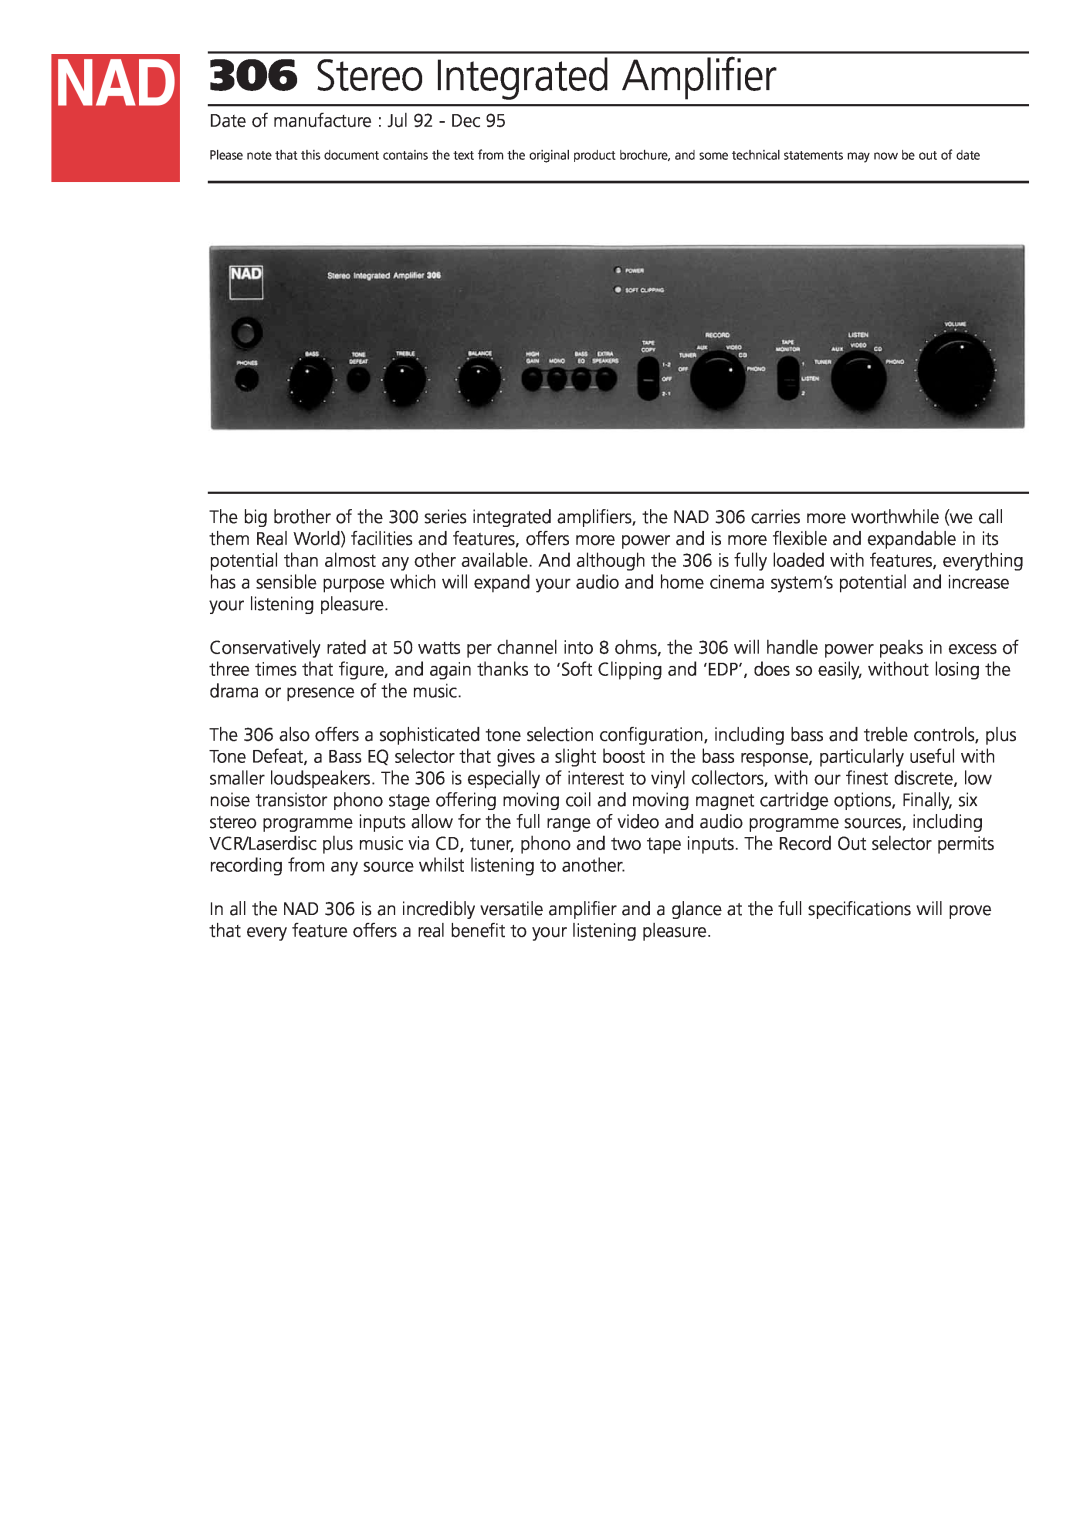 NAD brochure 306Stereo Integrated Amplifier 